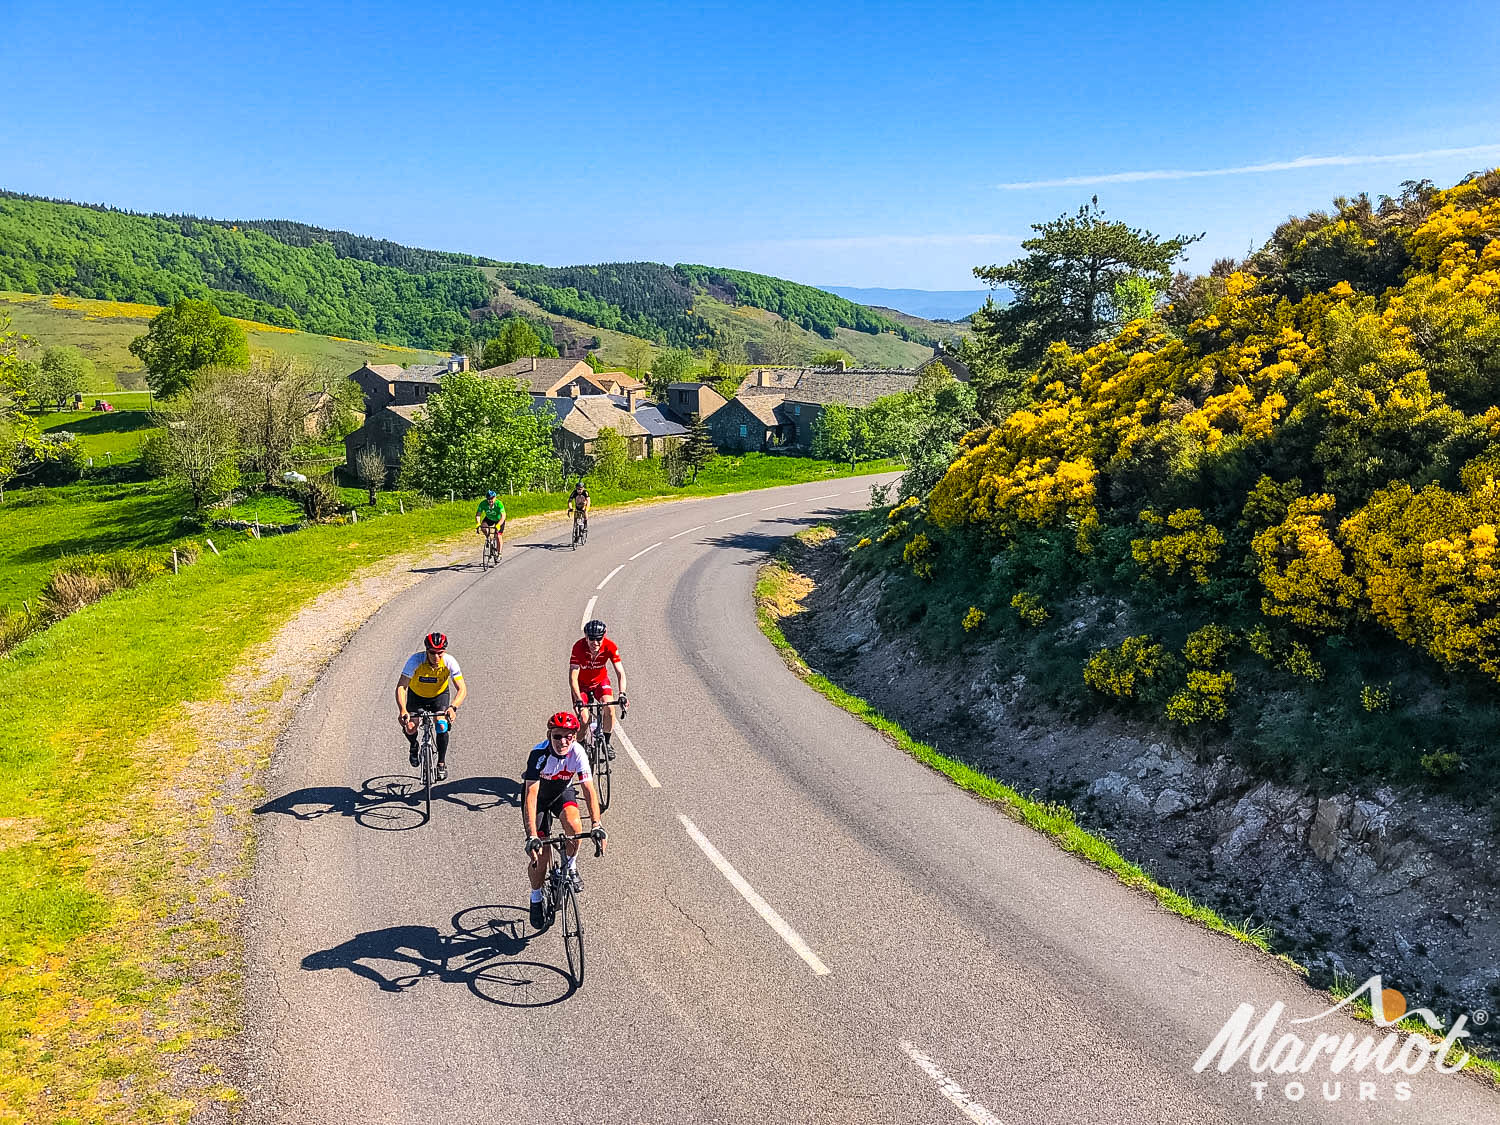 Cyclists and broom on guided cycling tour of southern France Cevennes & Ardeche with Marmot Tours